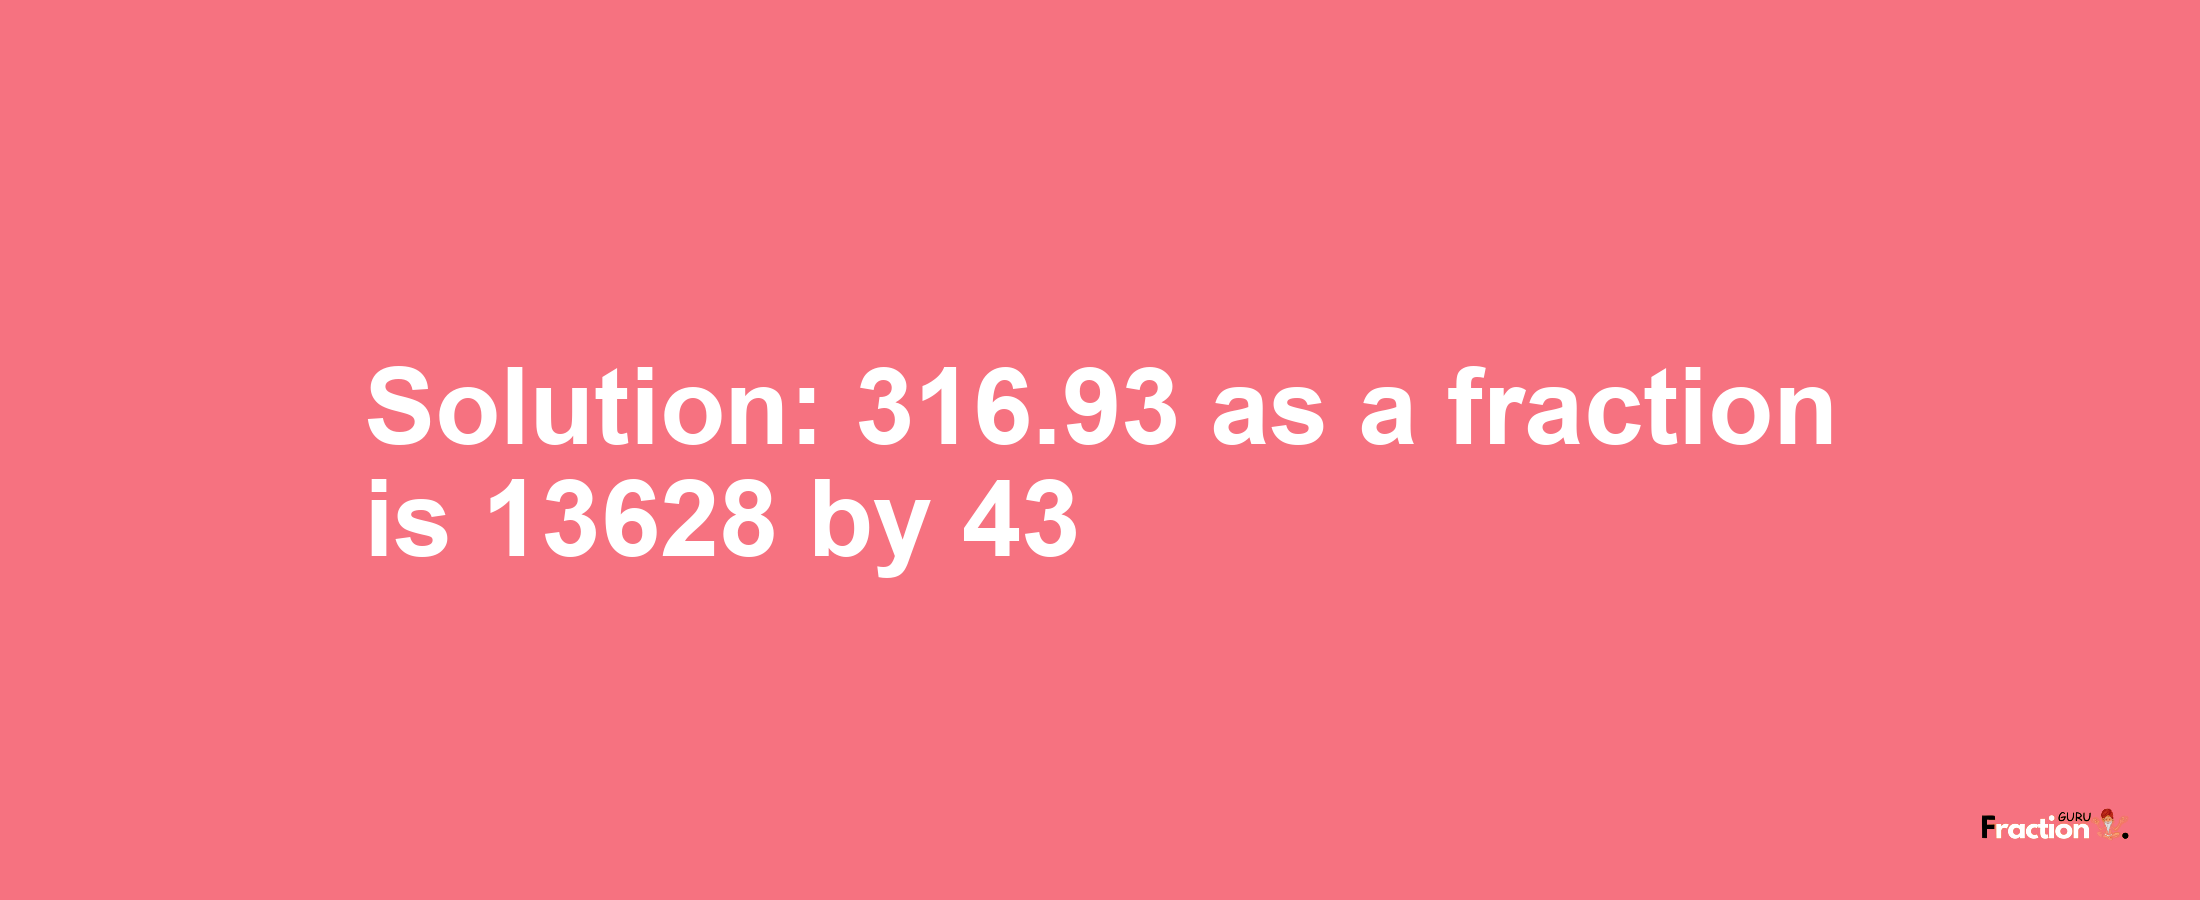 Solution:316.93 as a fraction is 13628/43